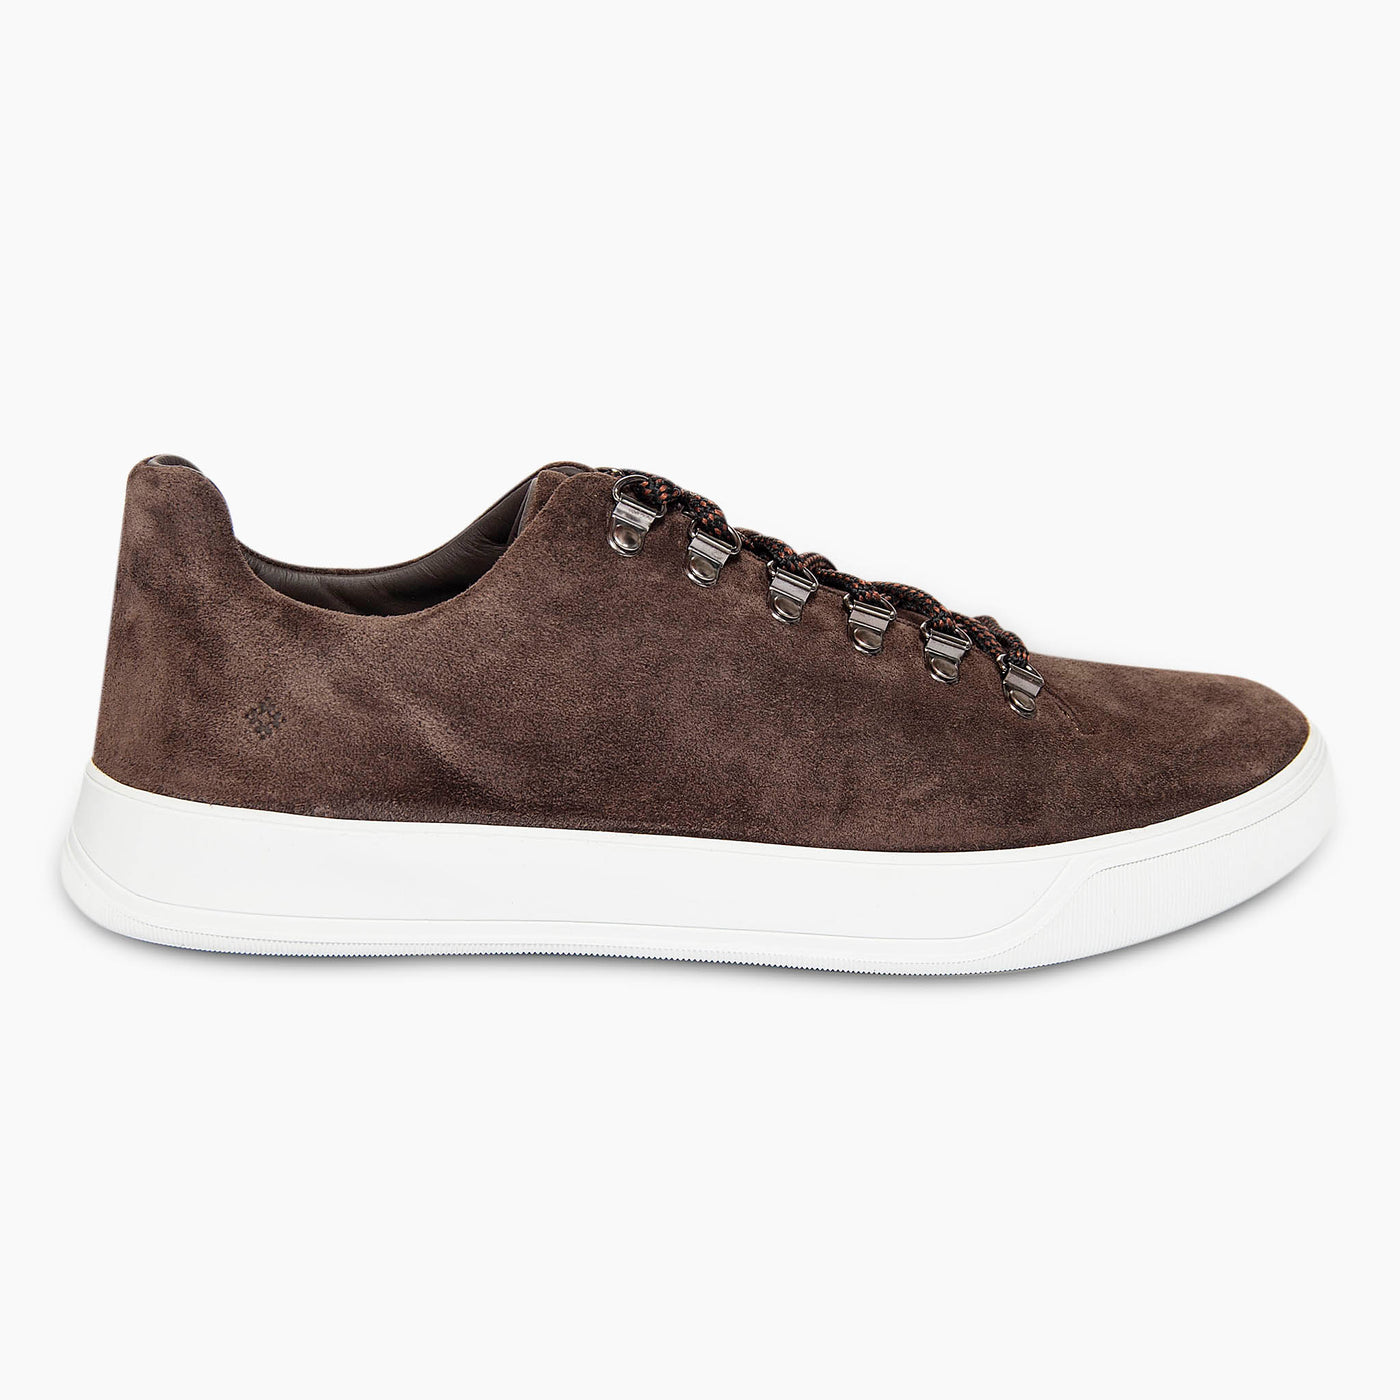 Dermot suede leather sneaker with hooked eyelets (espresso)